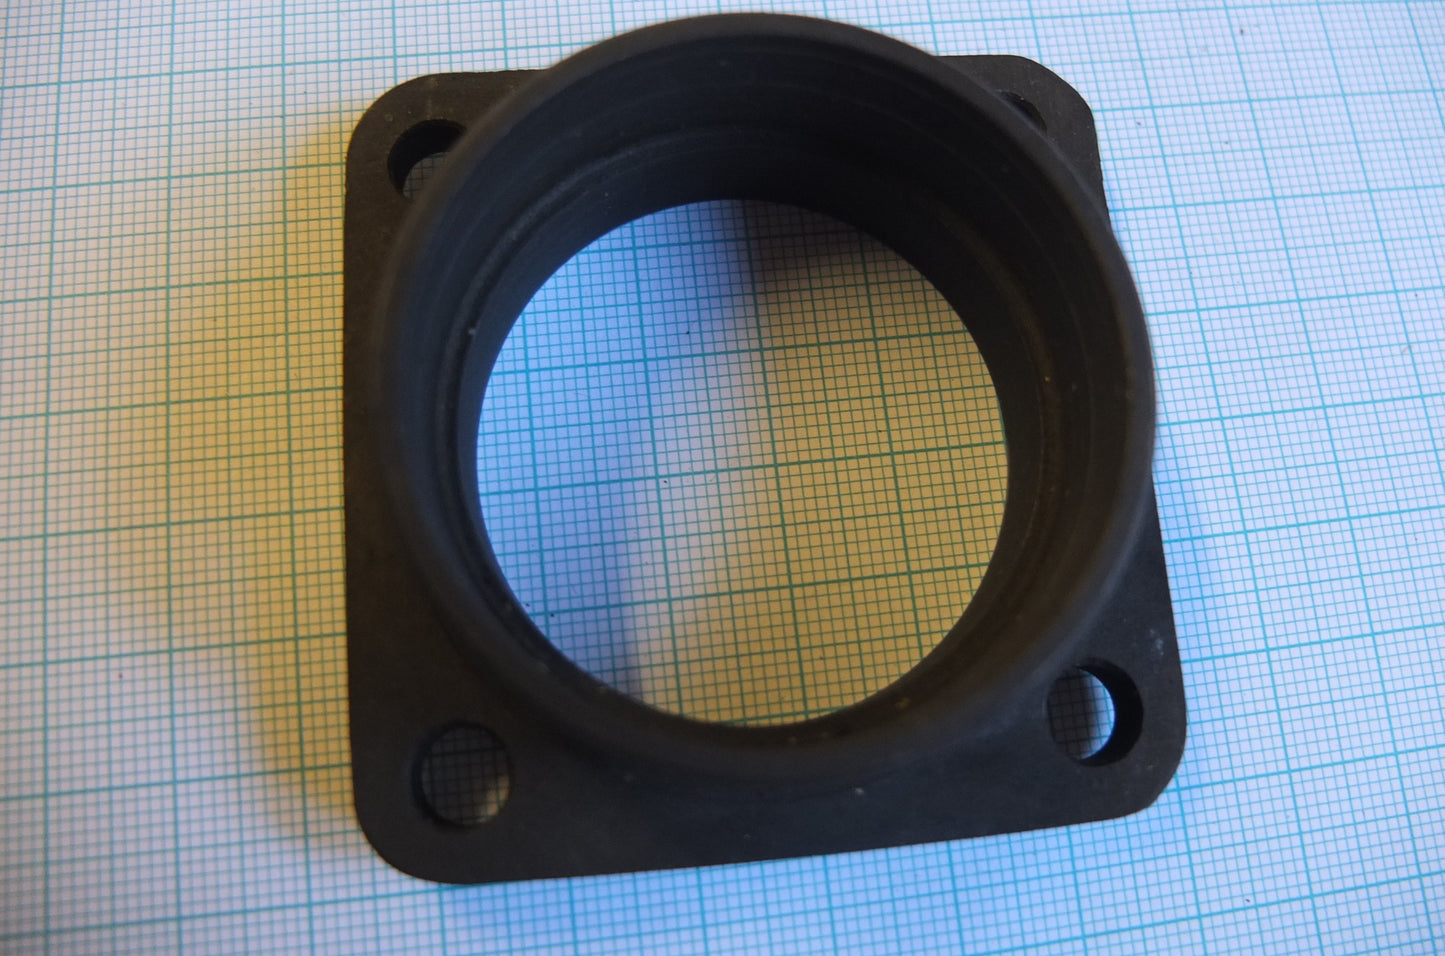 P8/082 Thrust Bearing Cup (secondhand)